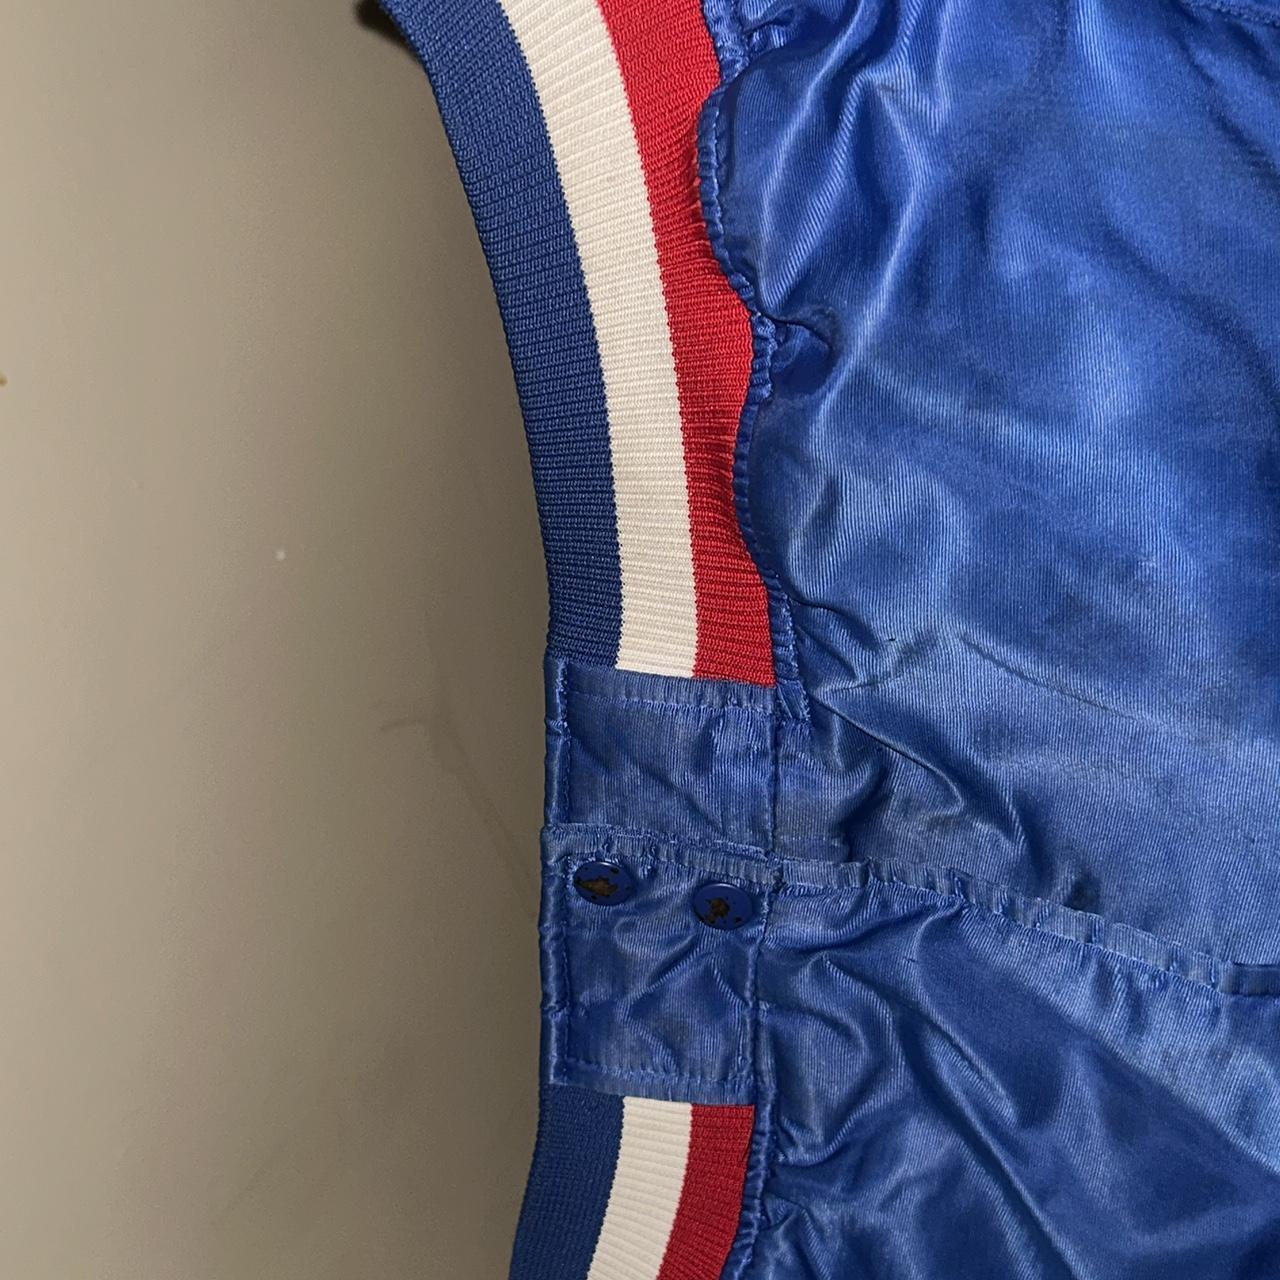 76ers Puffer Jacket i’m used condition. some... - Depop